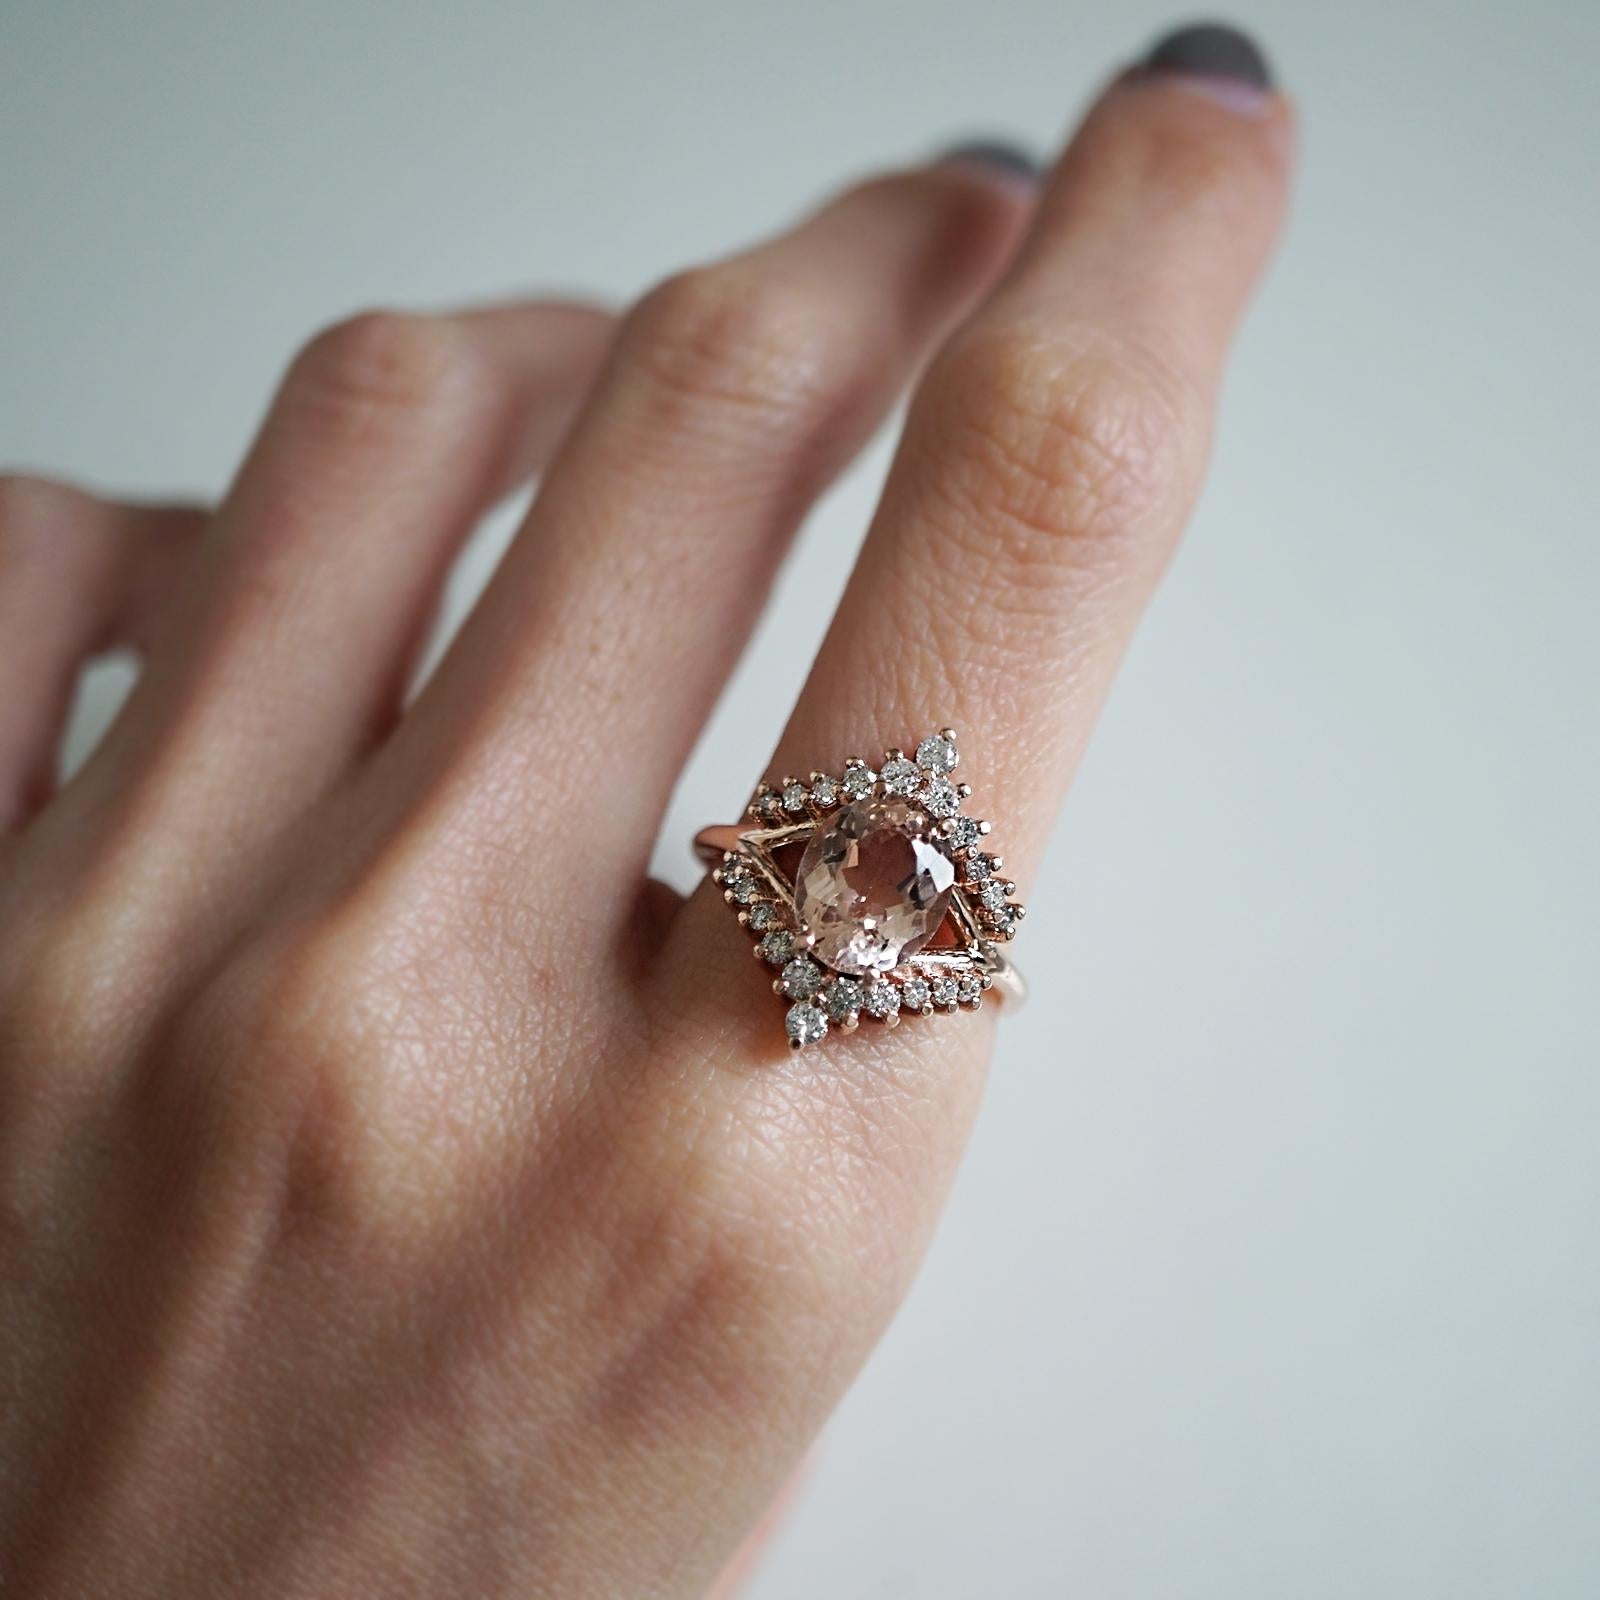 ** Tippy Taste Heirloom Collection are made-to-order. Please allow 3-4 week turnaround time. Make a note of your ring size and metal color during checkout. 

The Morganite Tiara Diamond ring is available in 14K solid yellow gold, white gold and rose